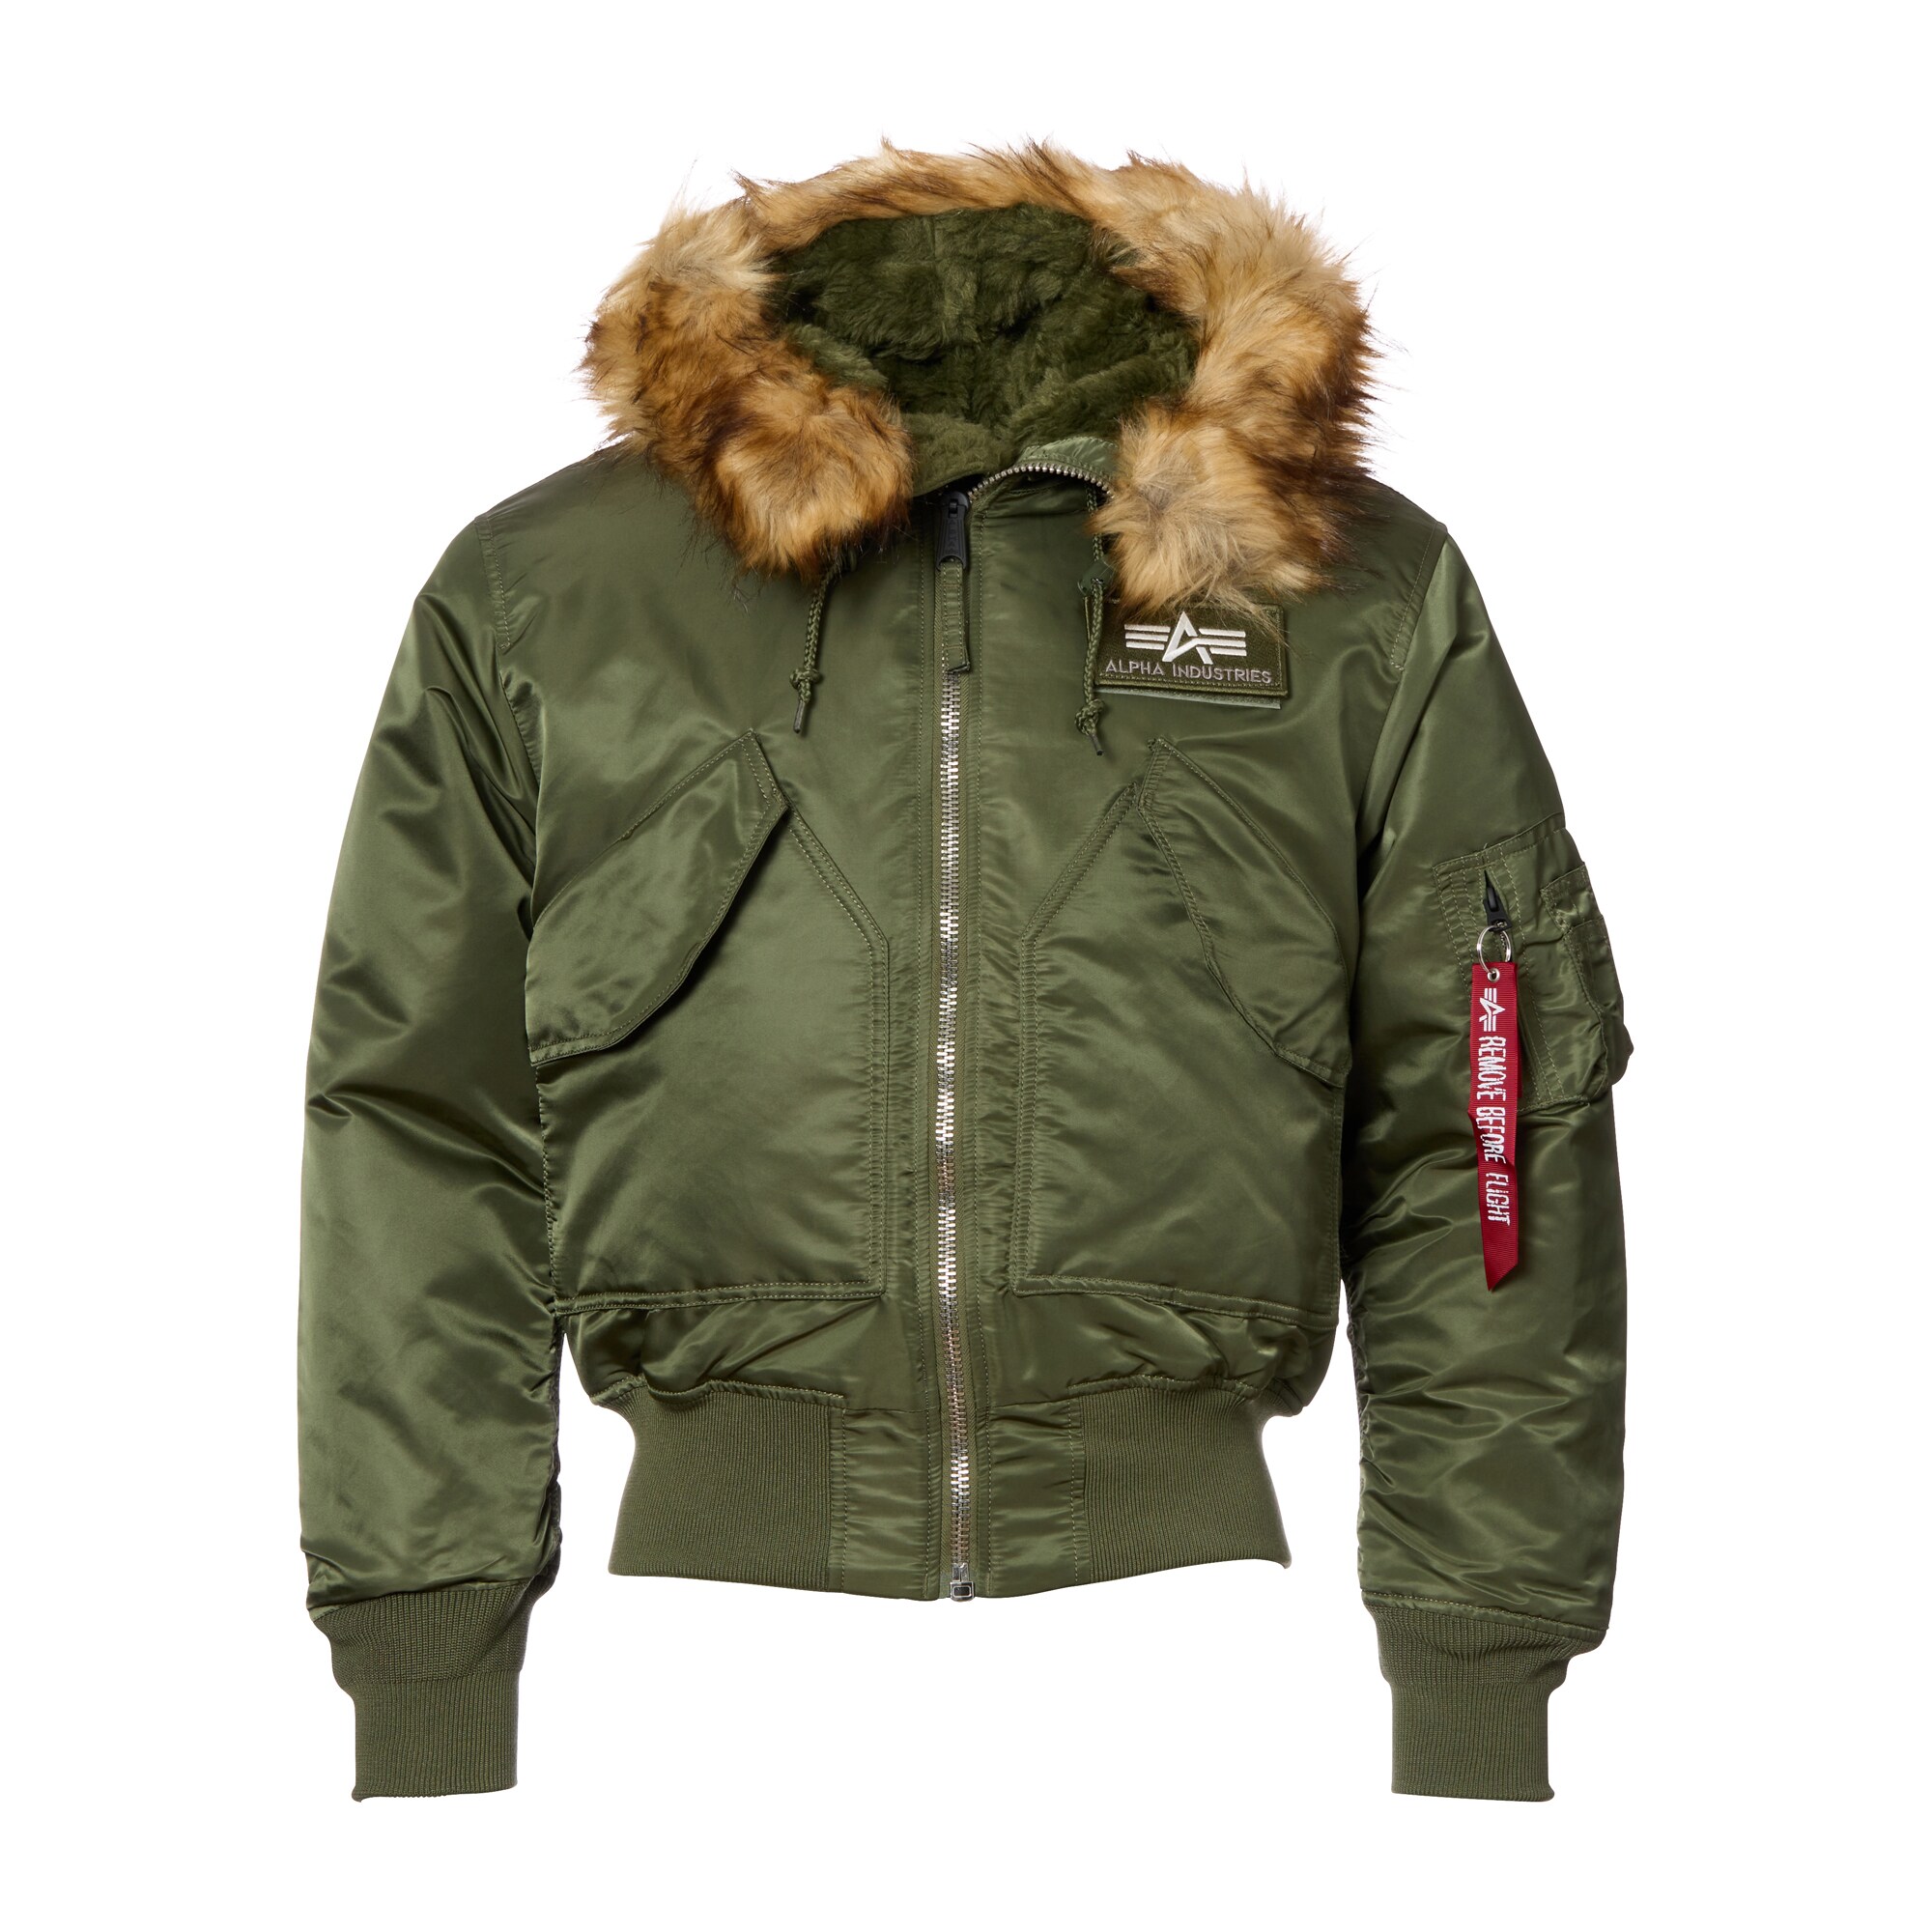 Purchase the Alpha Industries Flight Jacket 45P Hooded sage gree